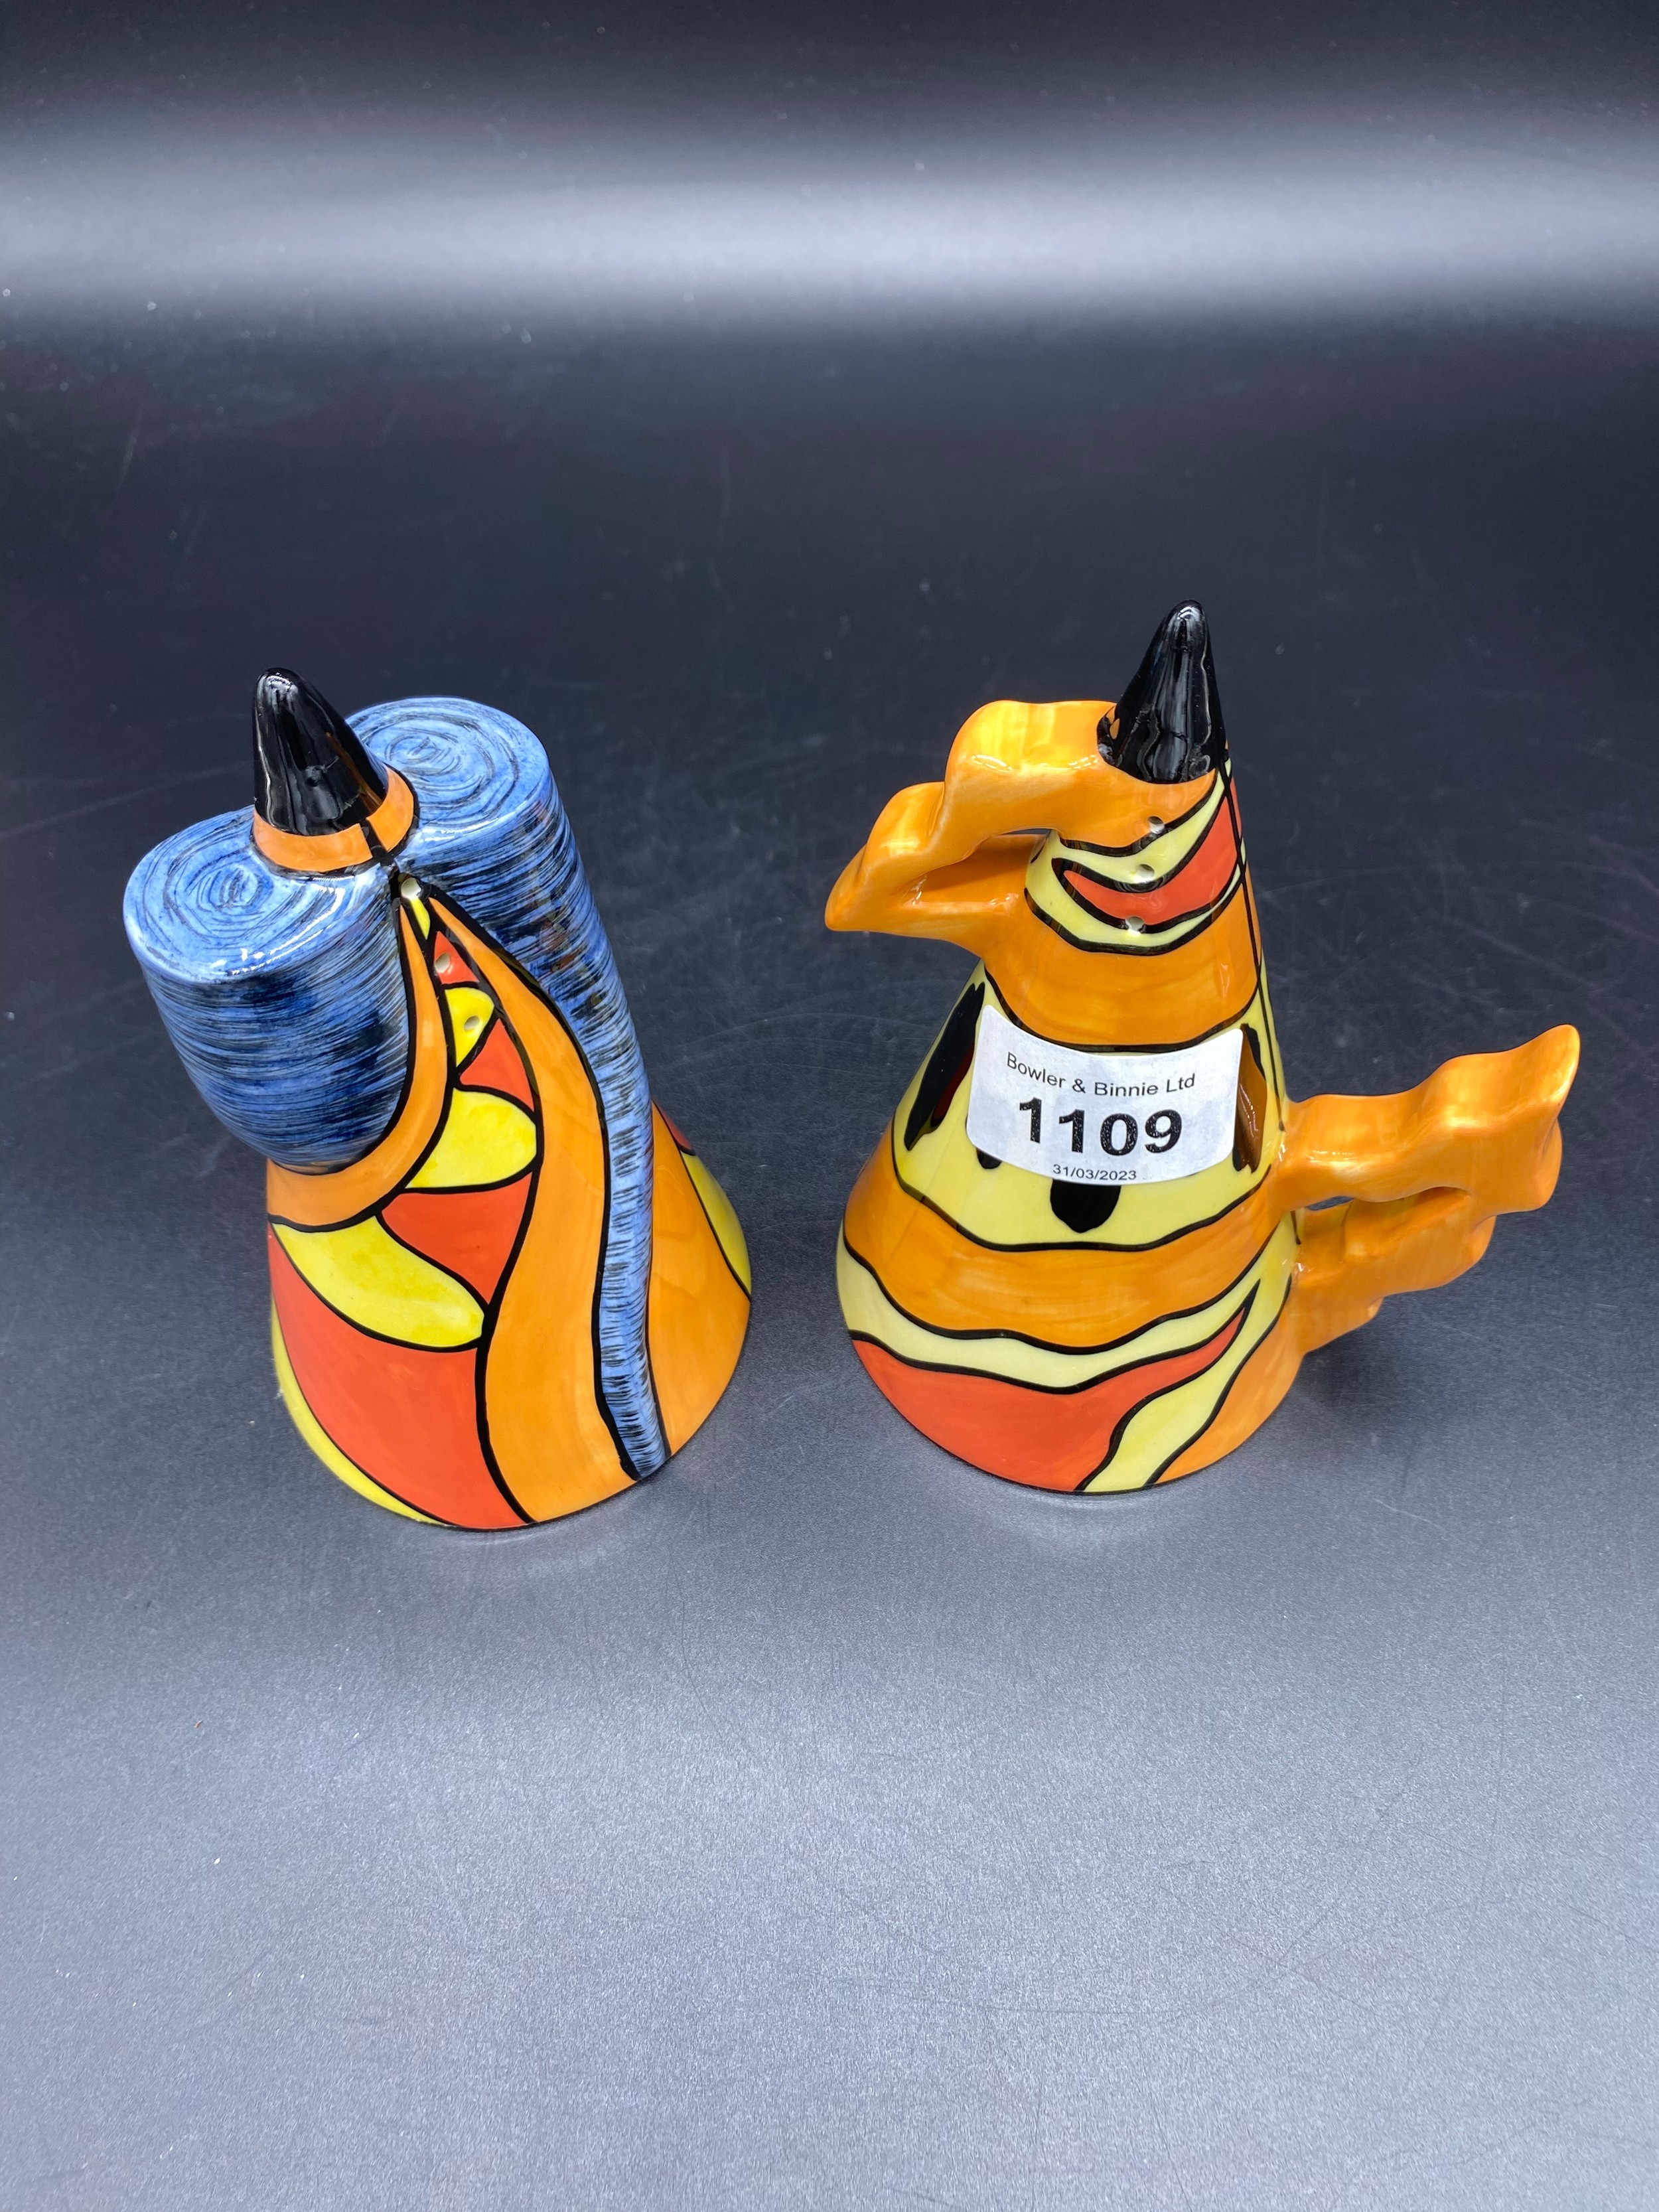 Lorna Bailey Old Ellgreave Pottery ''Twister'' and ''Fire'' sugar sifters, signed. [14cm High] - Image 2 of 4